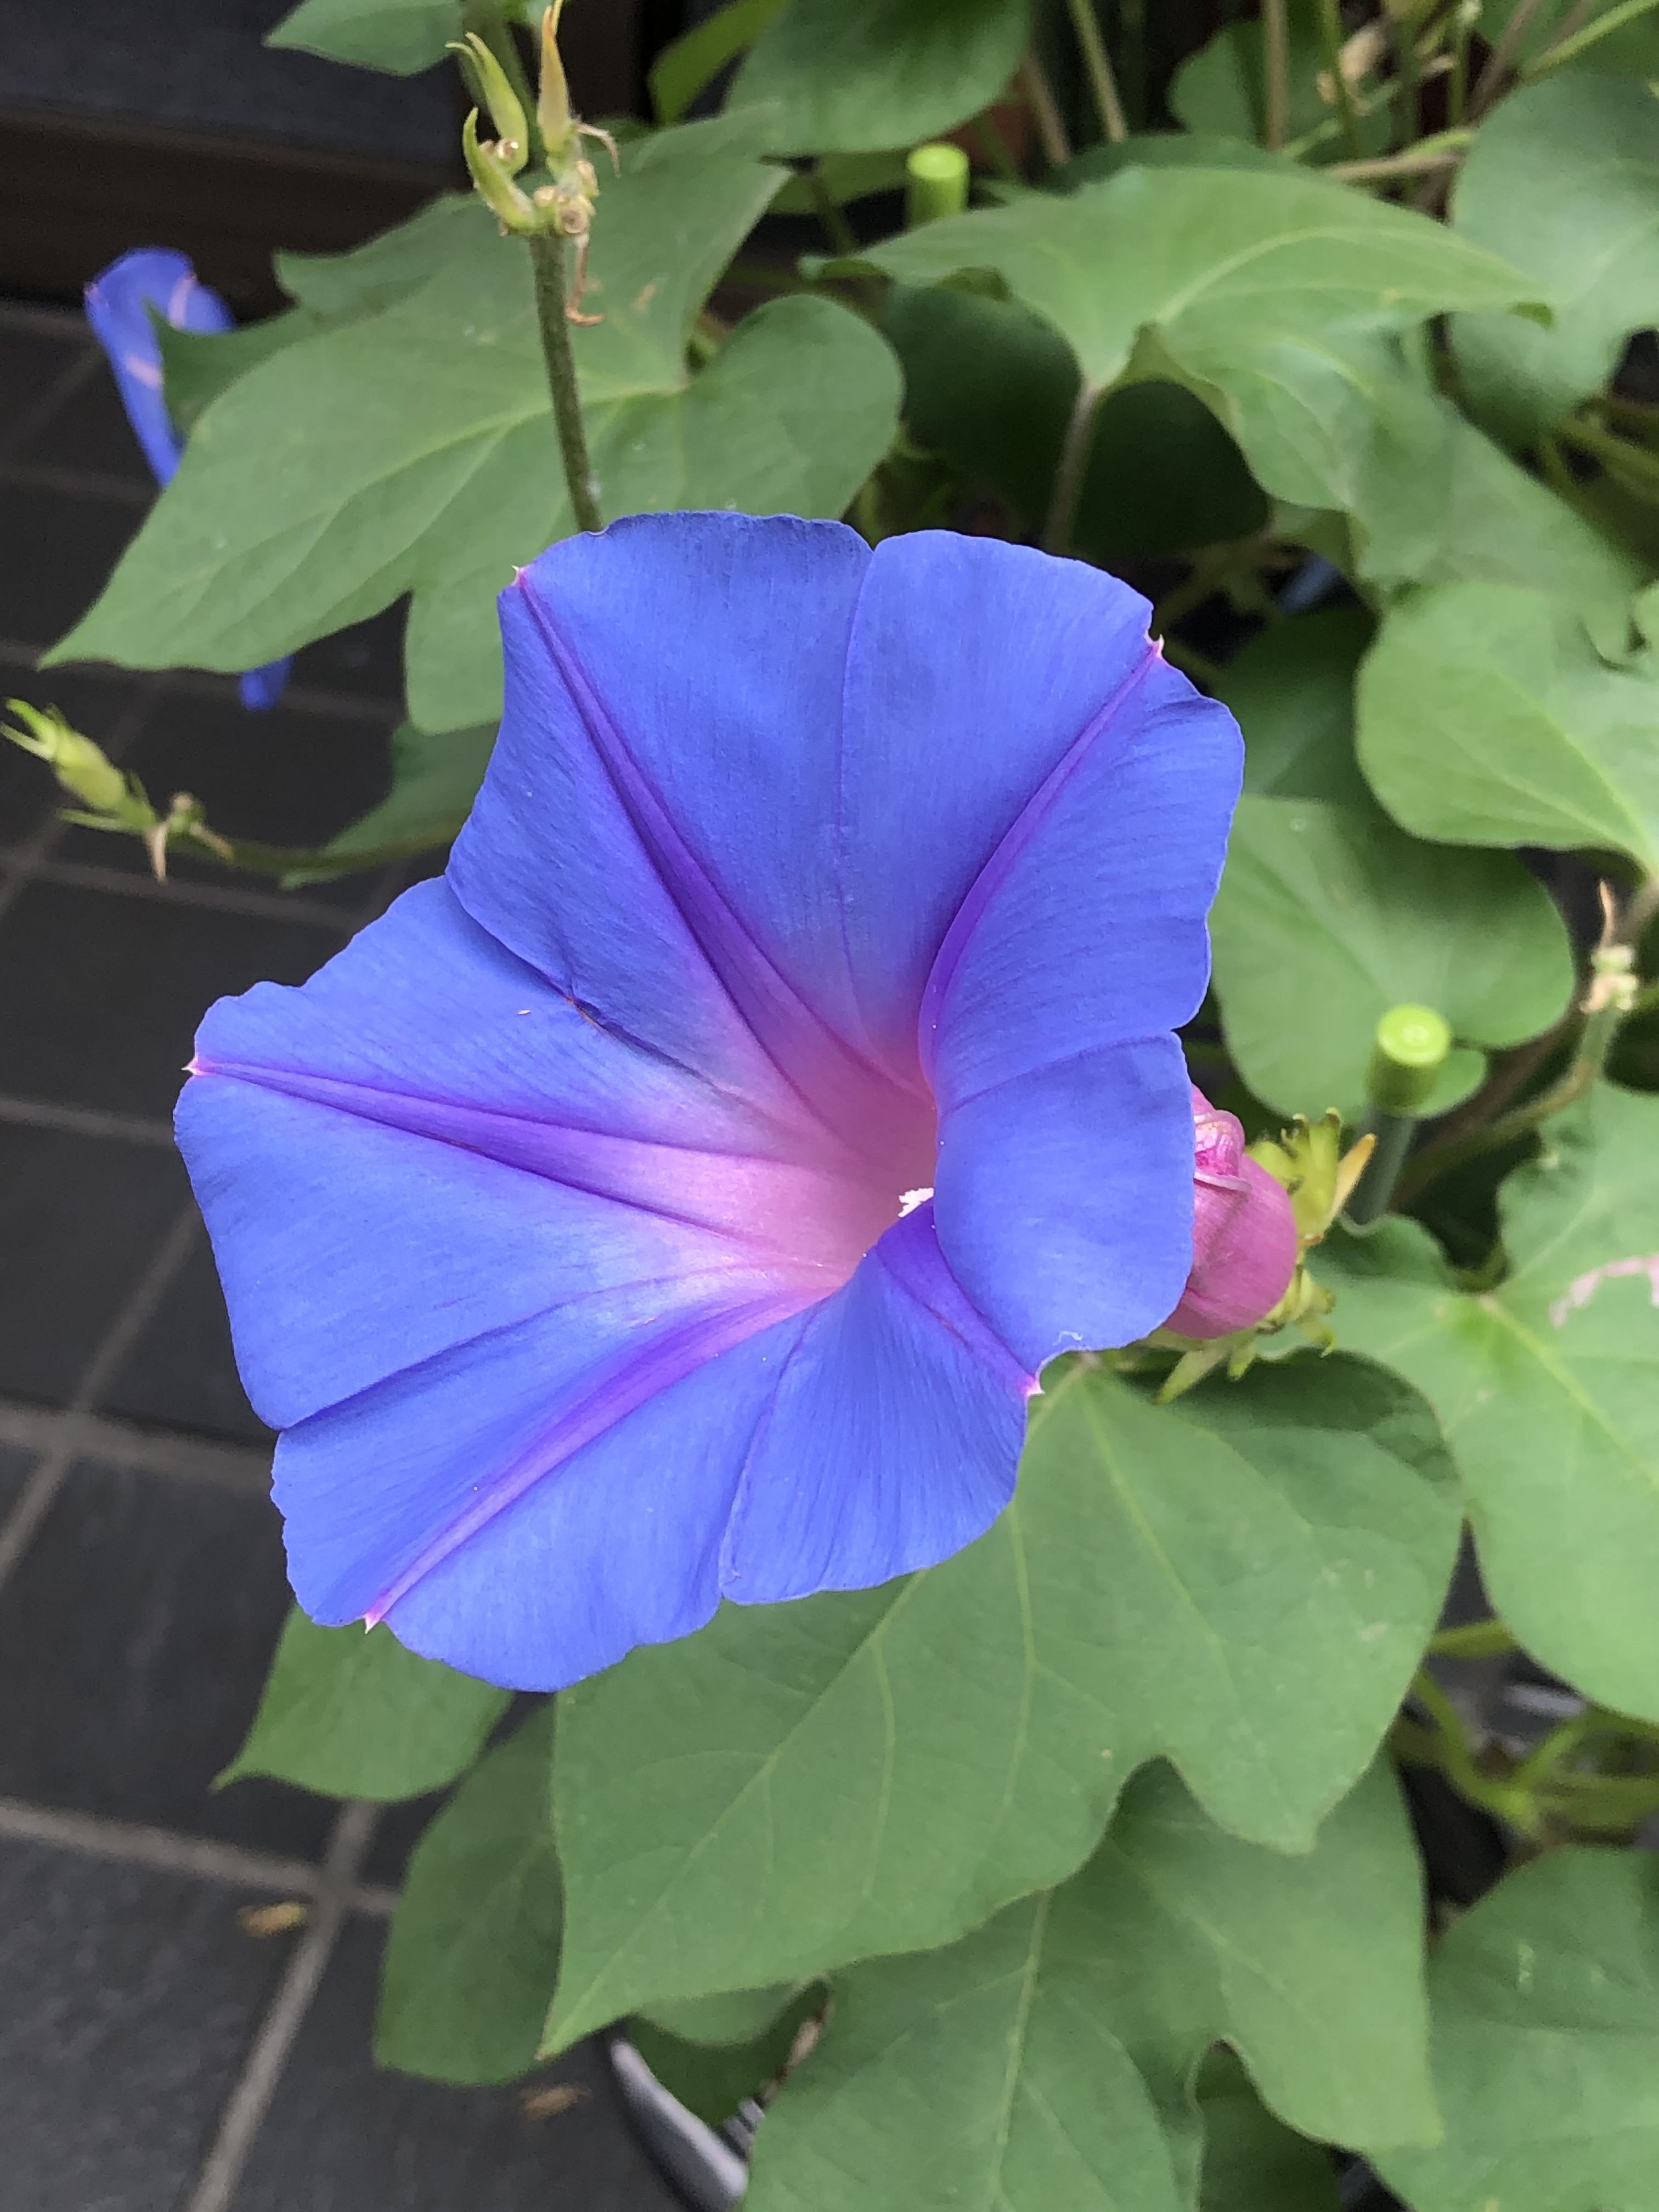 The summer’s edge, Morning glories blooming still, a bee‘s buzz nears.